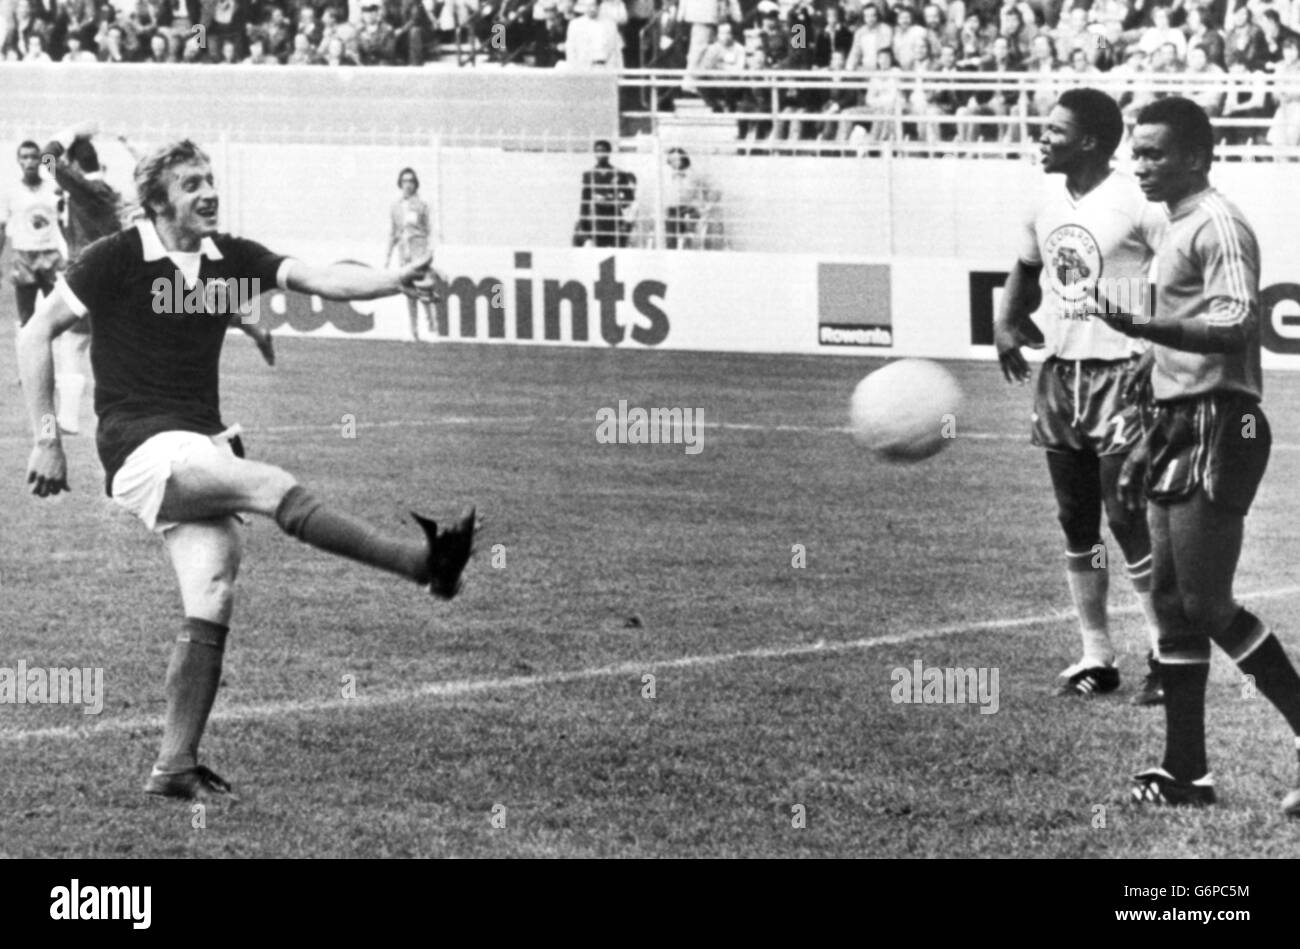 Denis Law jubilantly kicks the ball back into the net - a joke not shared by the dejected Zaire players - after teammate Peter Lorimer had scored Scotland's first goal in the Group Two World Cup match against Zaire at the Westfalenstadion in Dortmund. Stock Photo